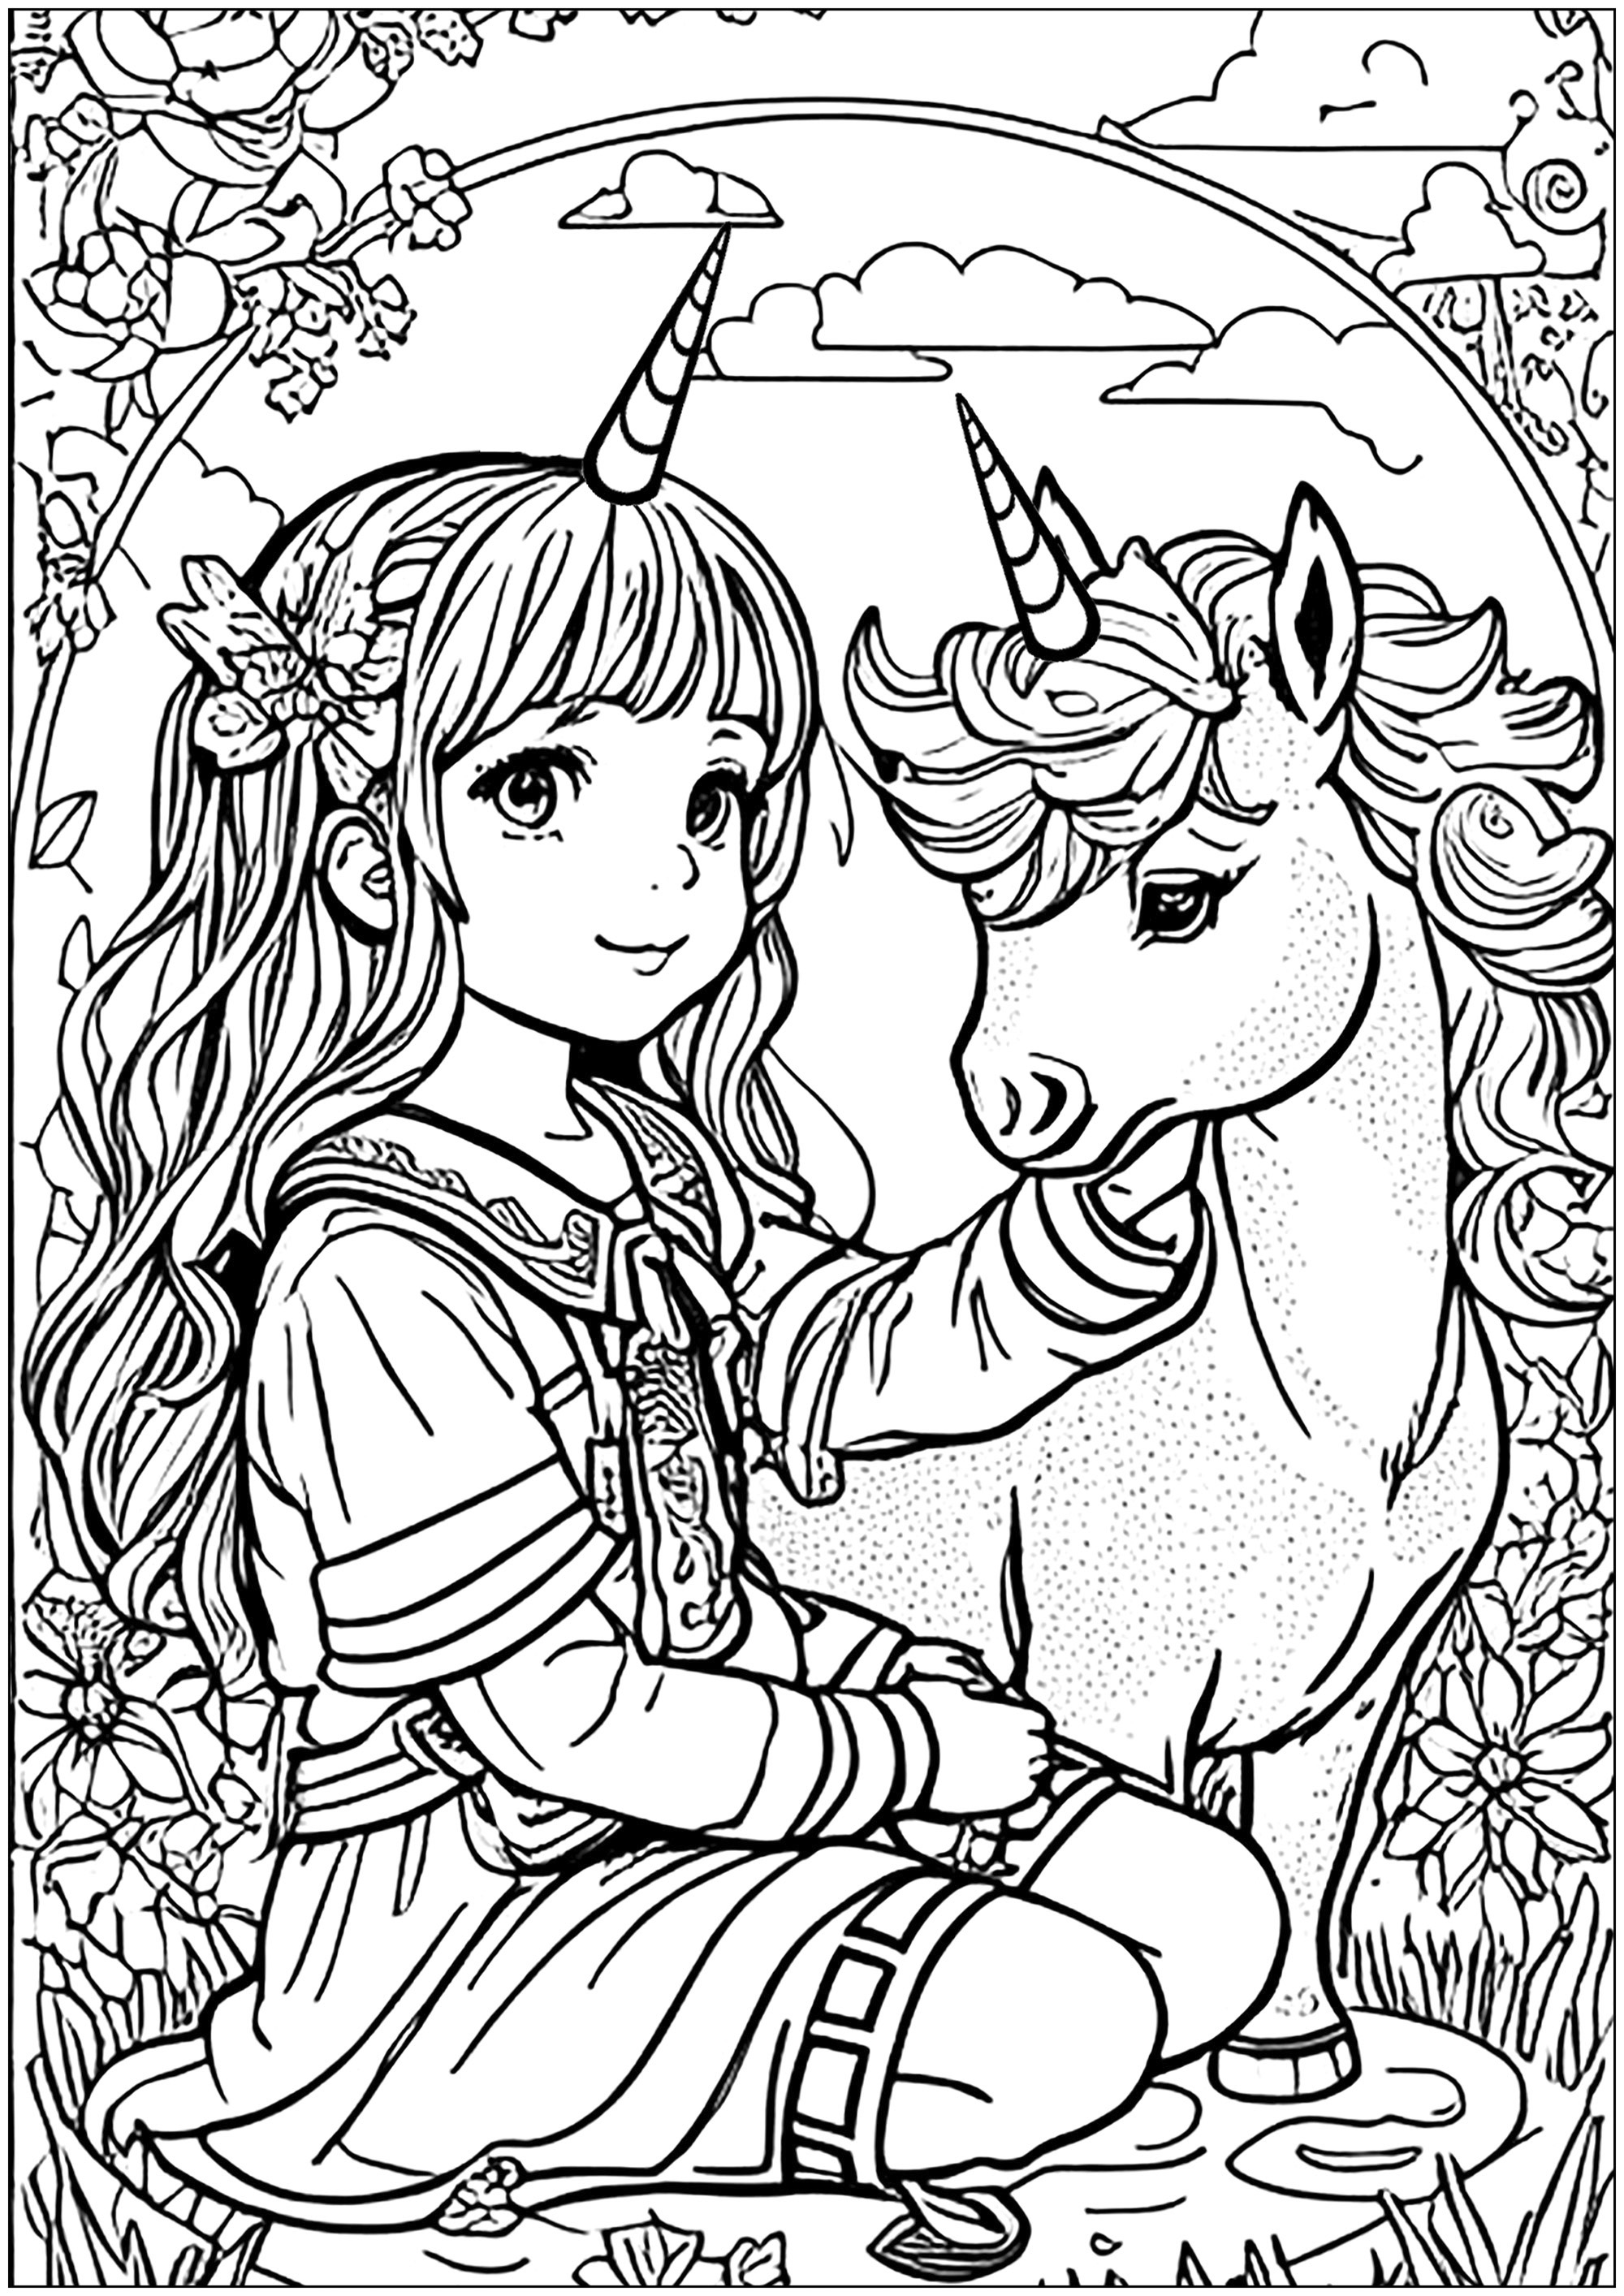 The girl and the unicorn. Could this little girl also be a unicorn?